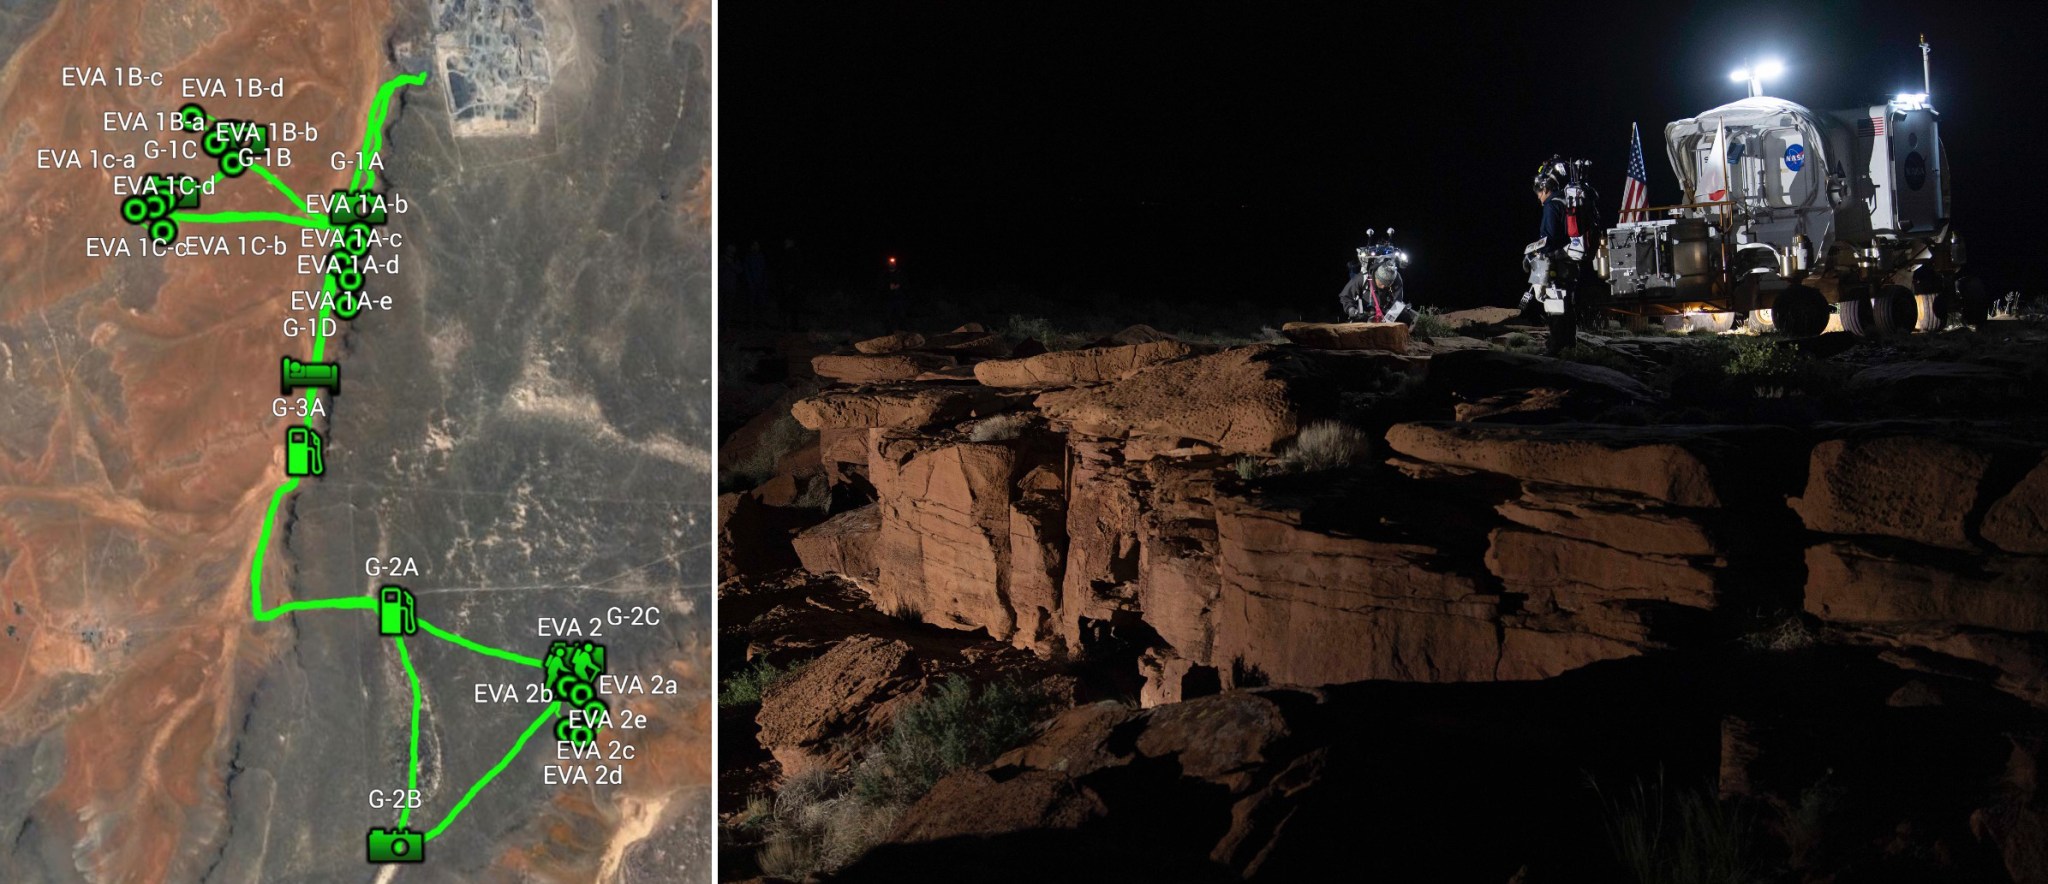 Left: One of the D-RATS traverses indicates the rover’s planned route and stops; Right: D-RATS crew members Naofumi Ikeda and Norishige Kanai conduct their first simulated moonwalk as part of their three-day mission.